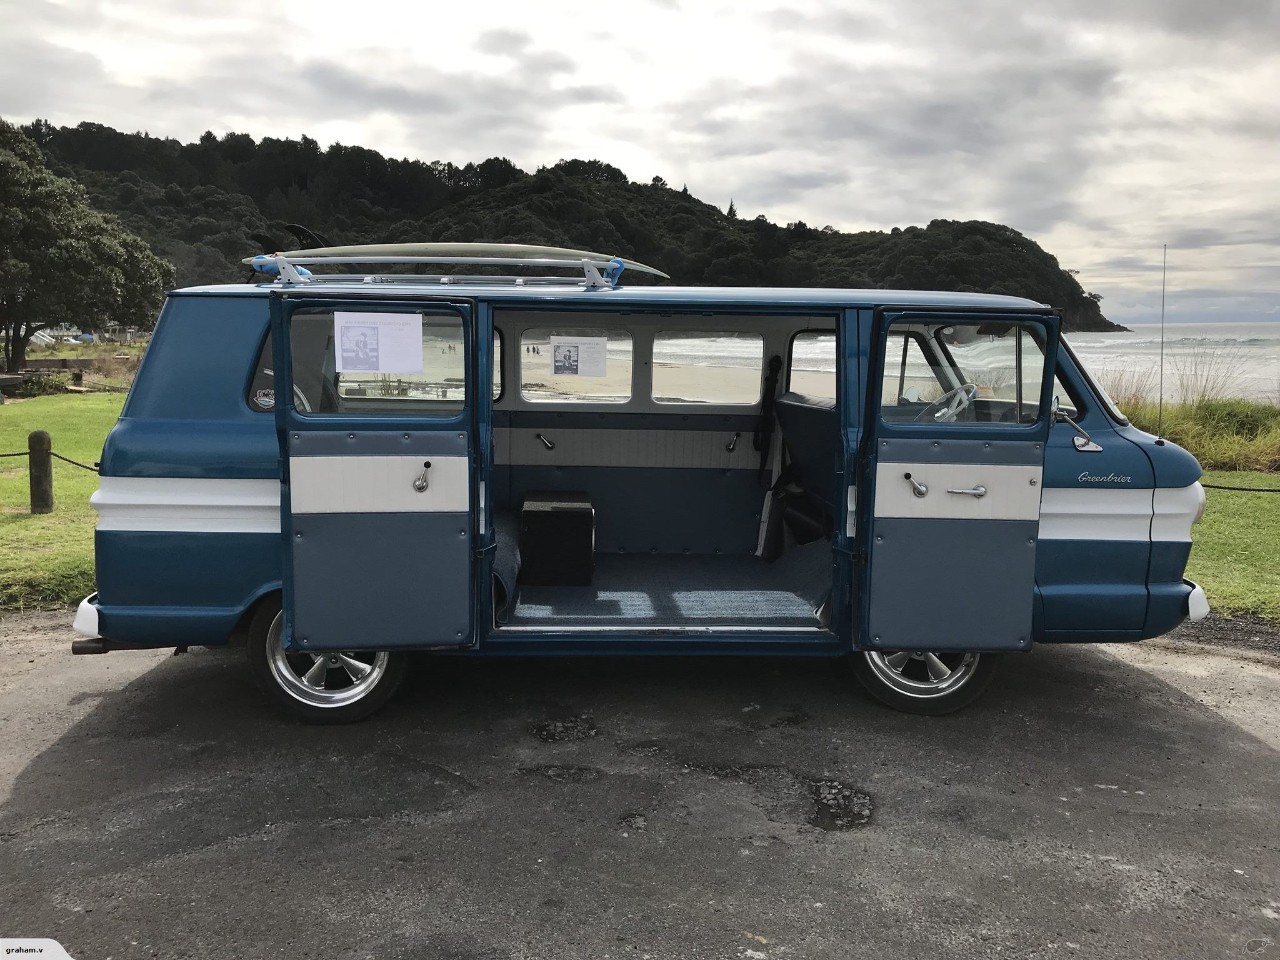 Need a Rockin' van? Chevy owned by Green Day's Billie Joe Armstrong for sale in NZ